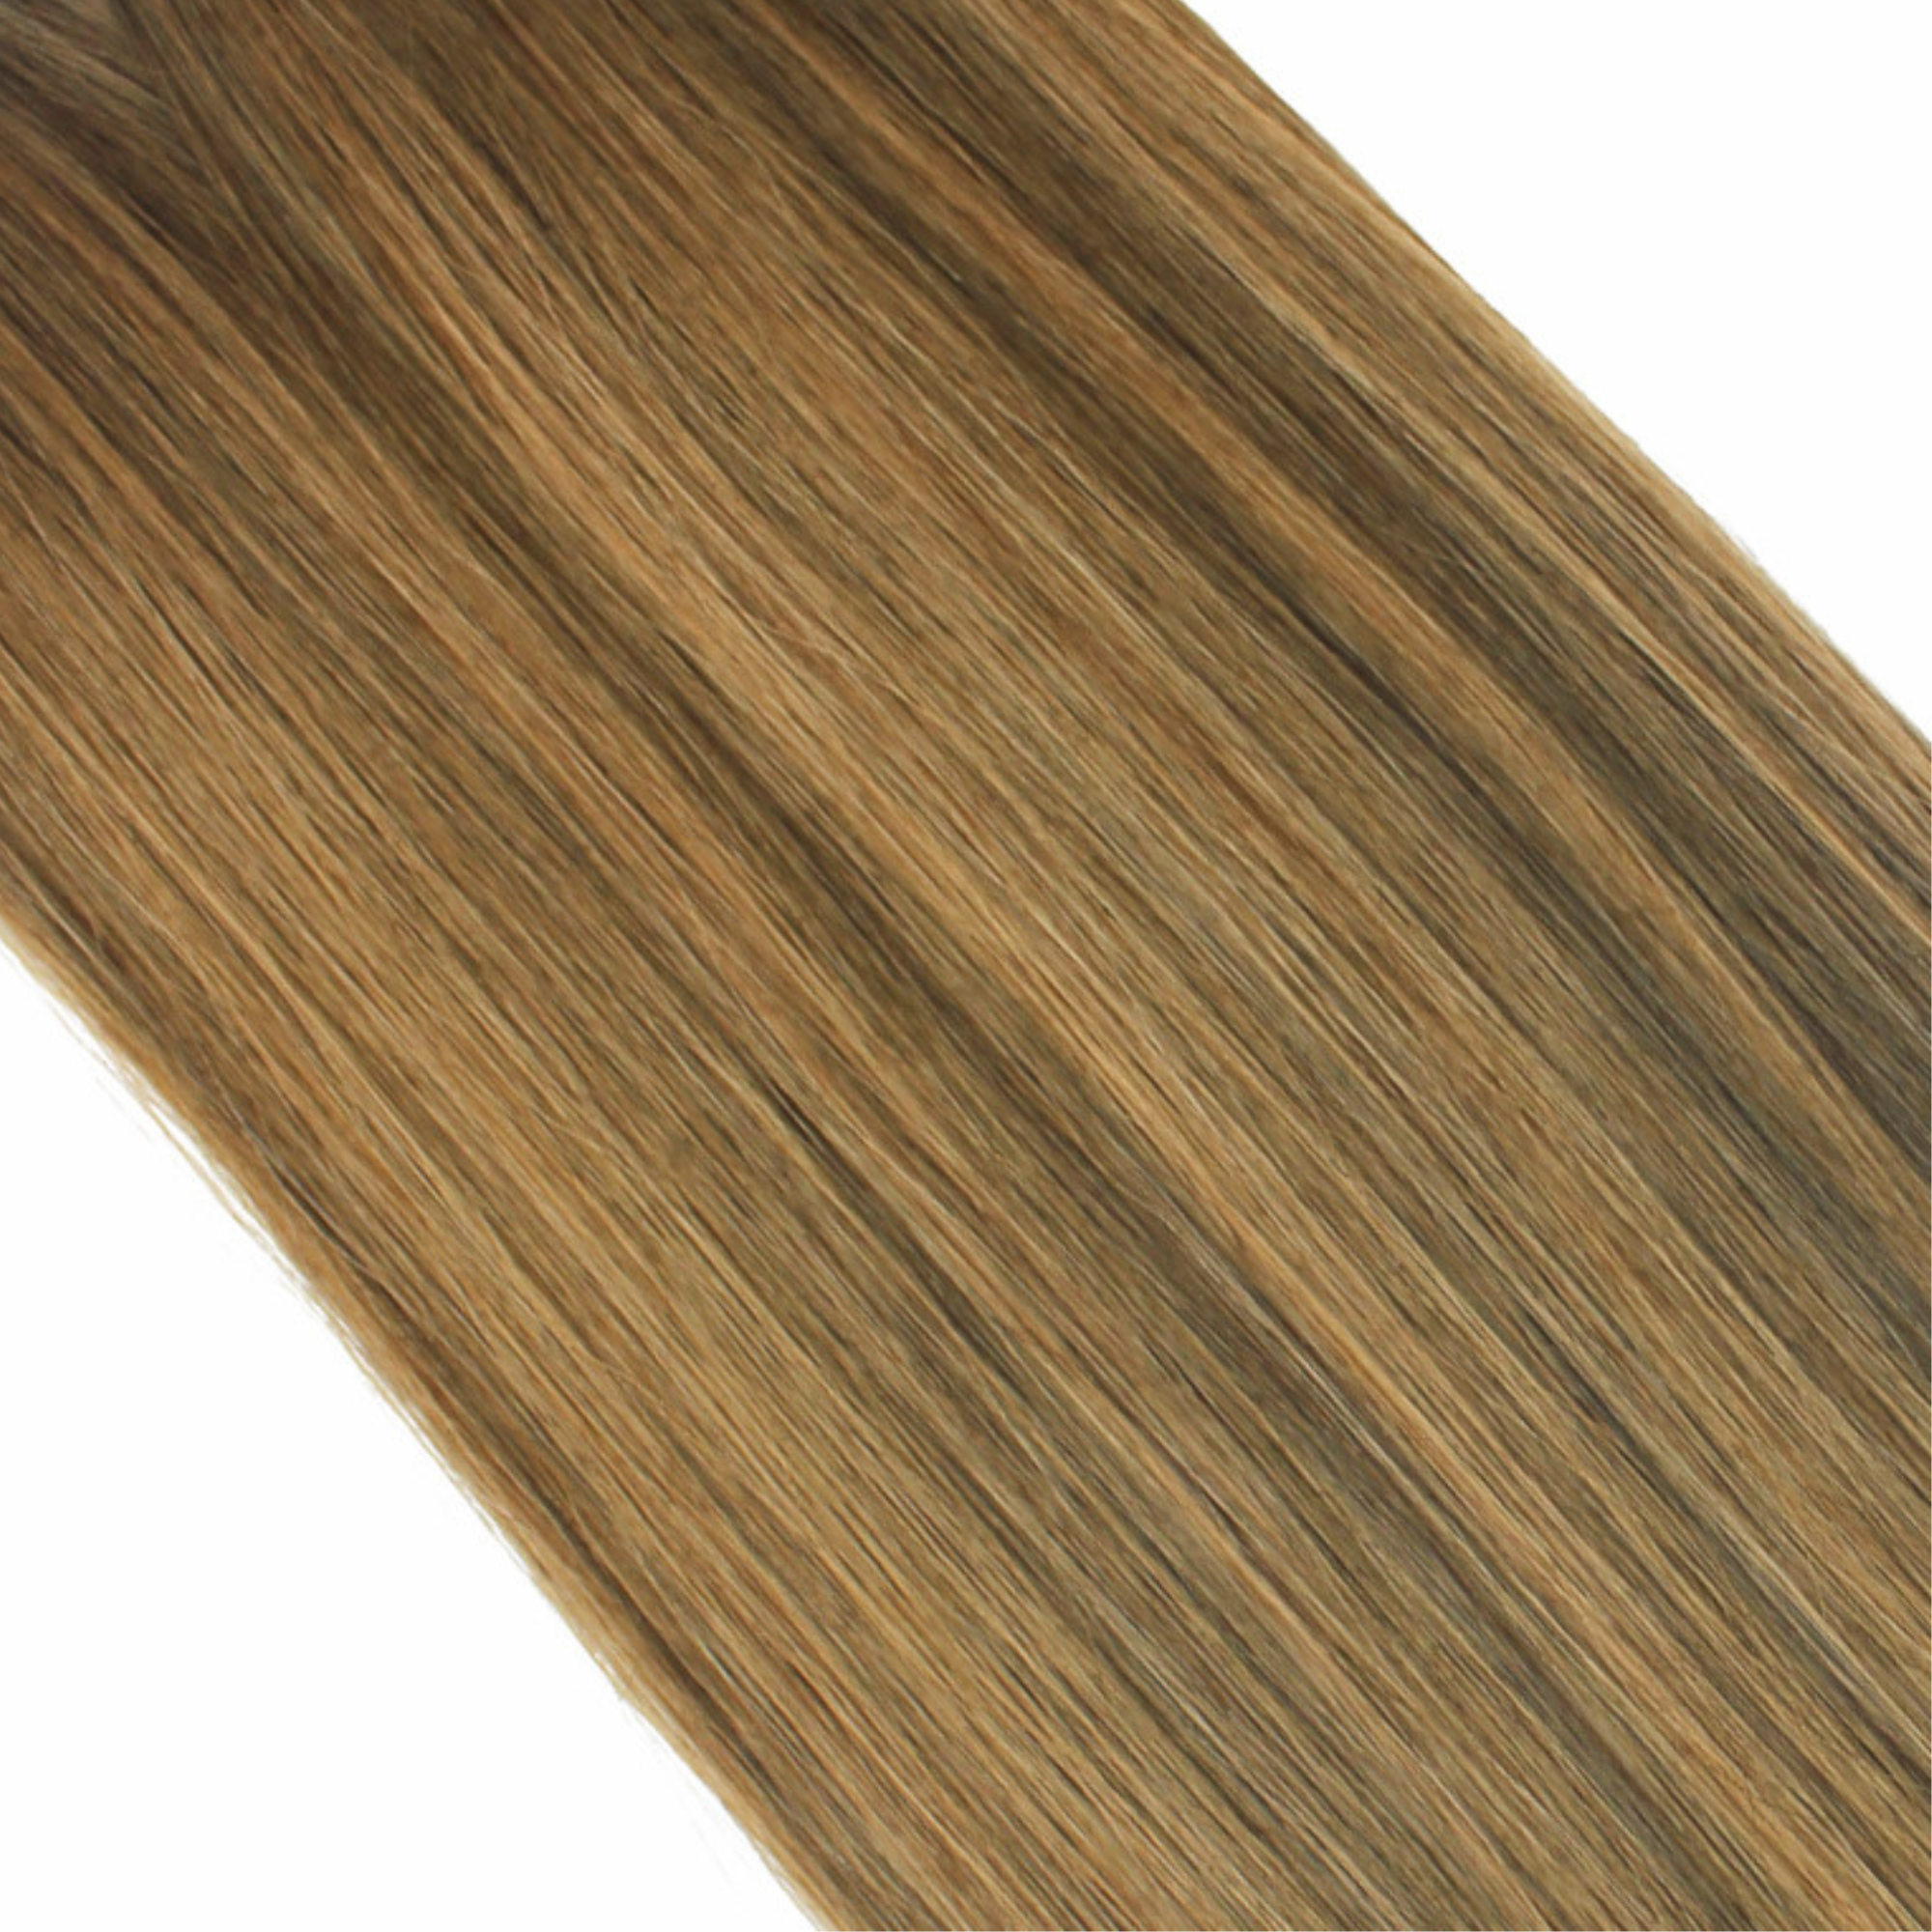 "hair rehab london 18" weft hair extensions shade swatch titled honey brown"